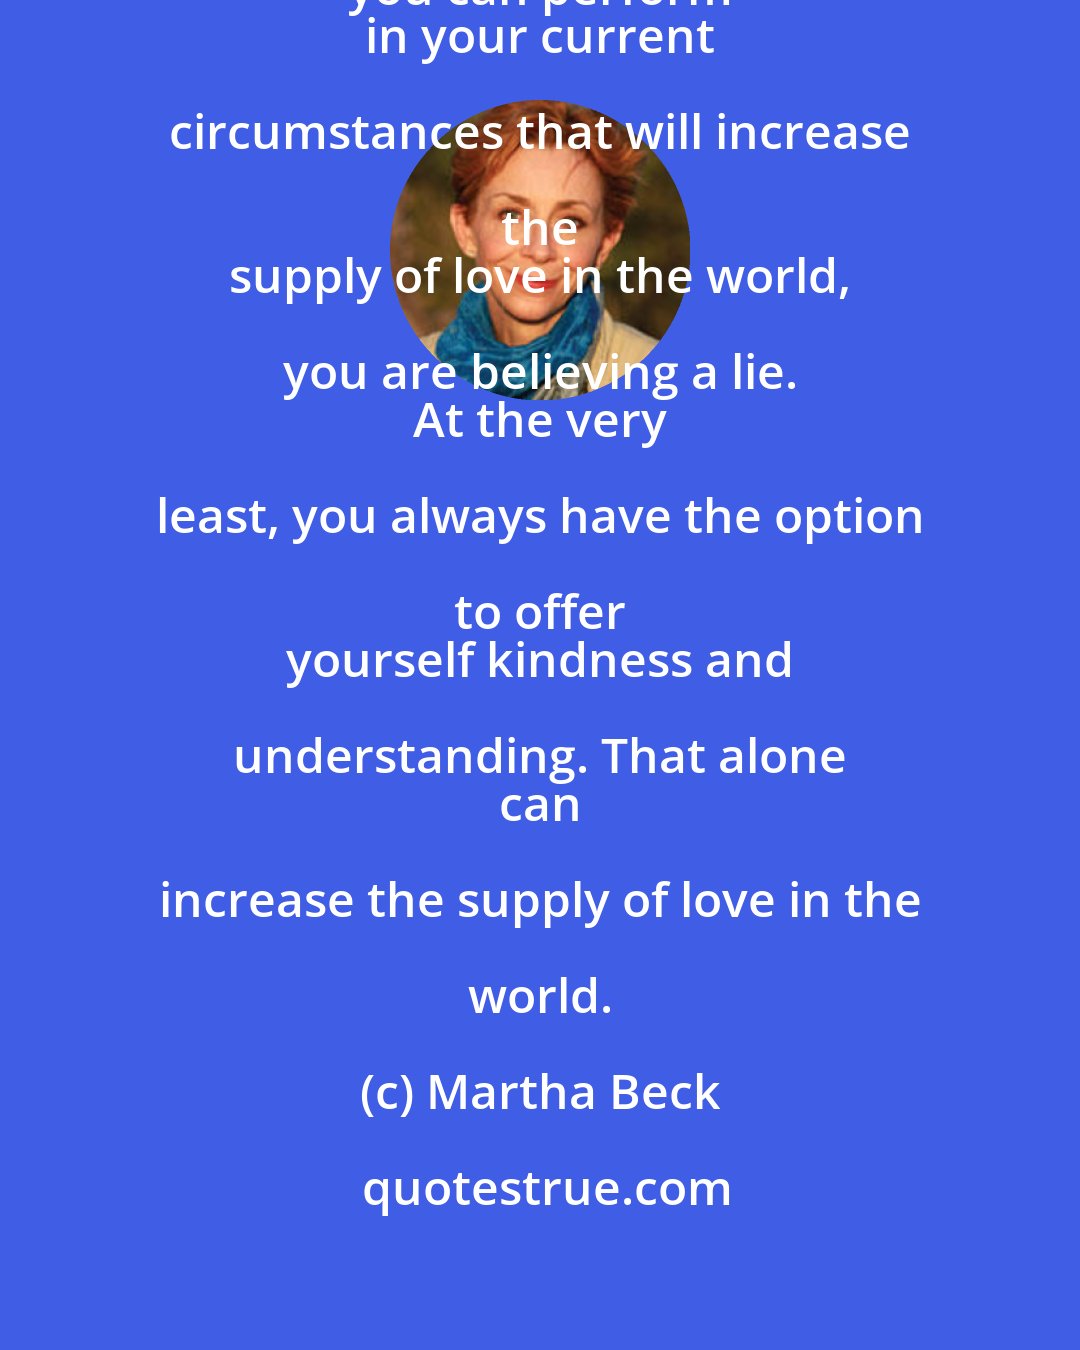 Martha Beck: If you think there is no action that you can perform 
 in your current circumstances that will increase the 
 supply of love in the world, you are believing a lie. 
 At the very least, you always have the option to offer 
 yourself kindness and understanding. That alone 
 can increase the supply of love in the world.